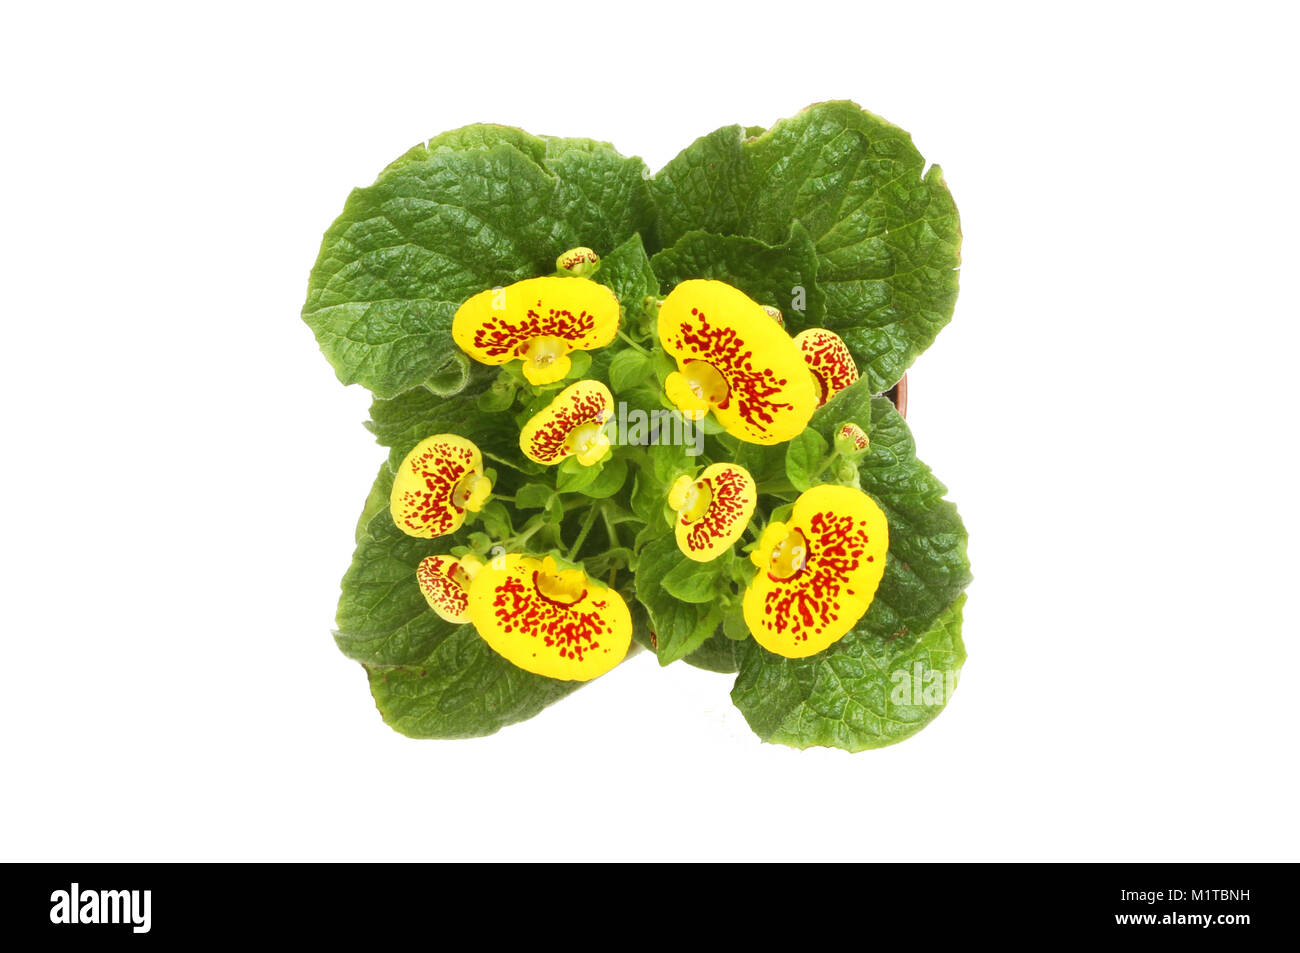 Flowering Calceolaria plant top view isolated against white Stock Photo